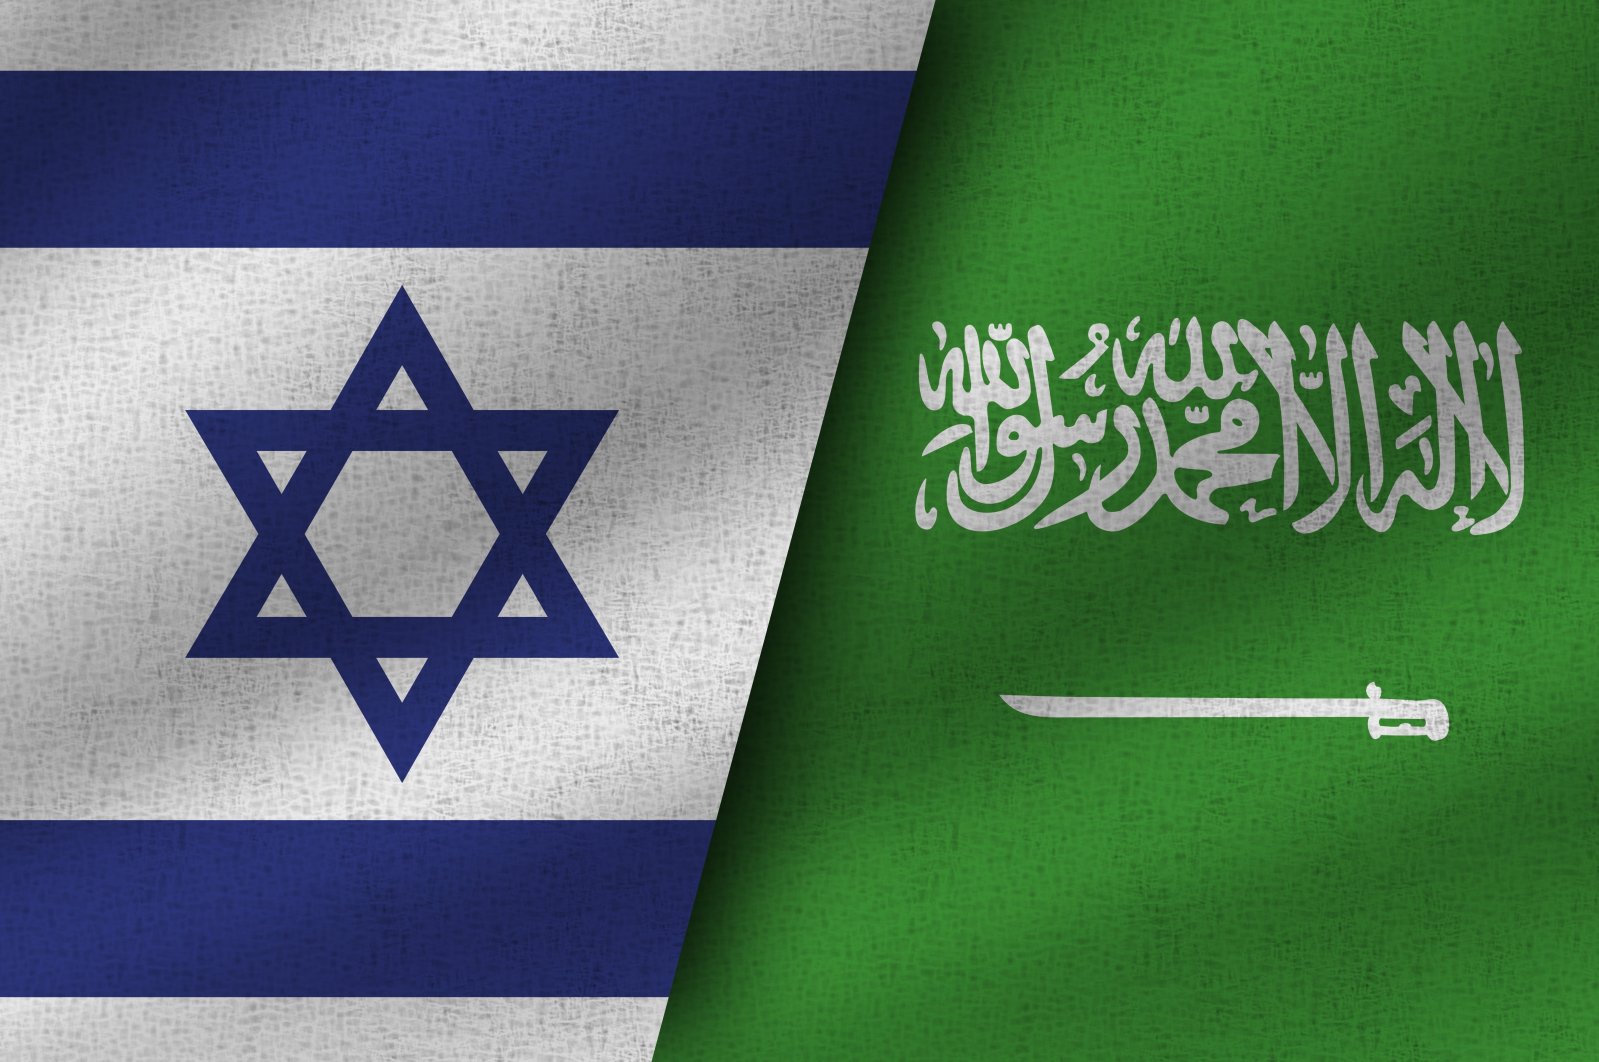 Riyadh officially has no relations with Israel, but the two countries have reportedly worked together on security issues for some time.